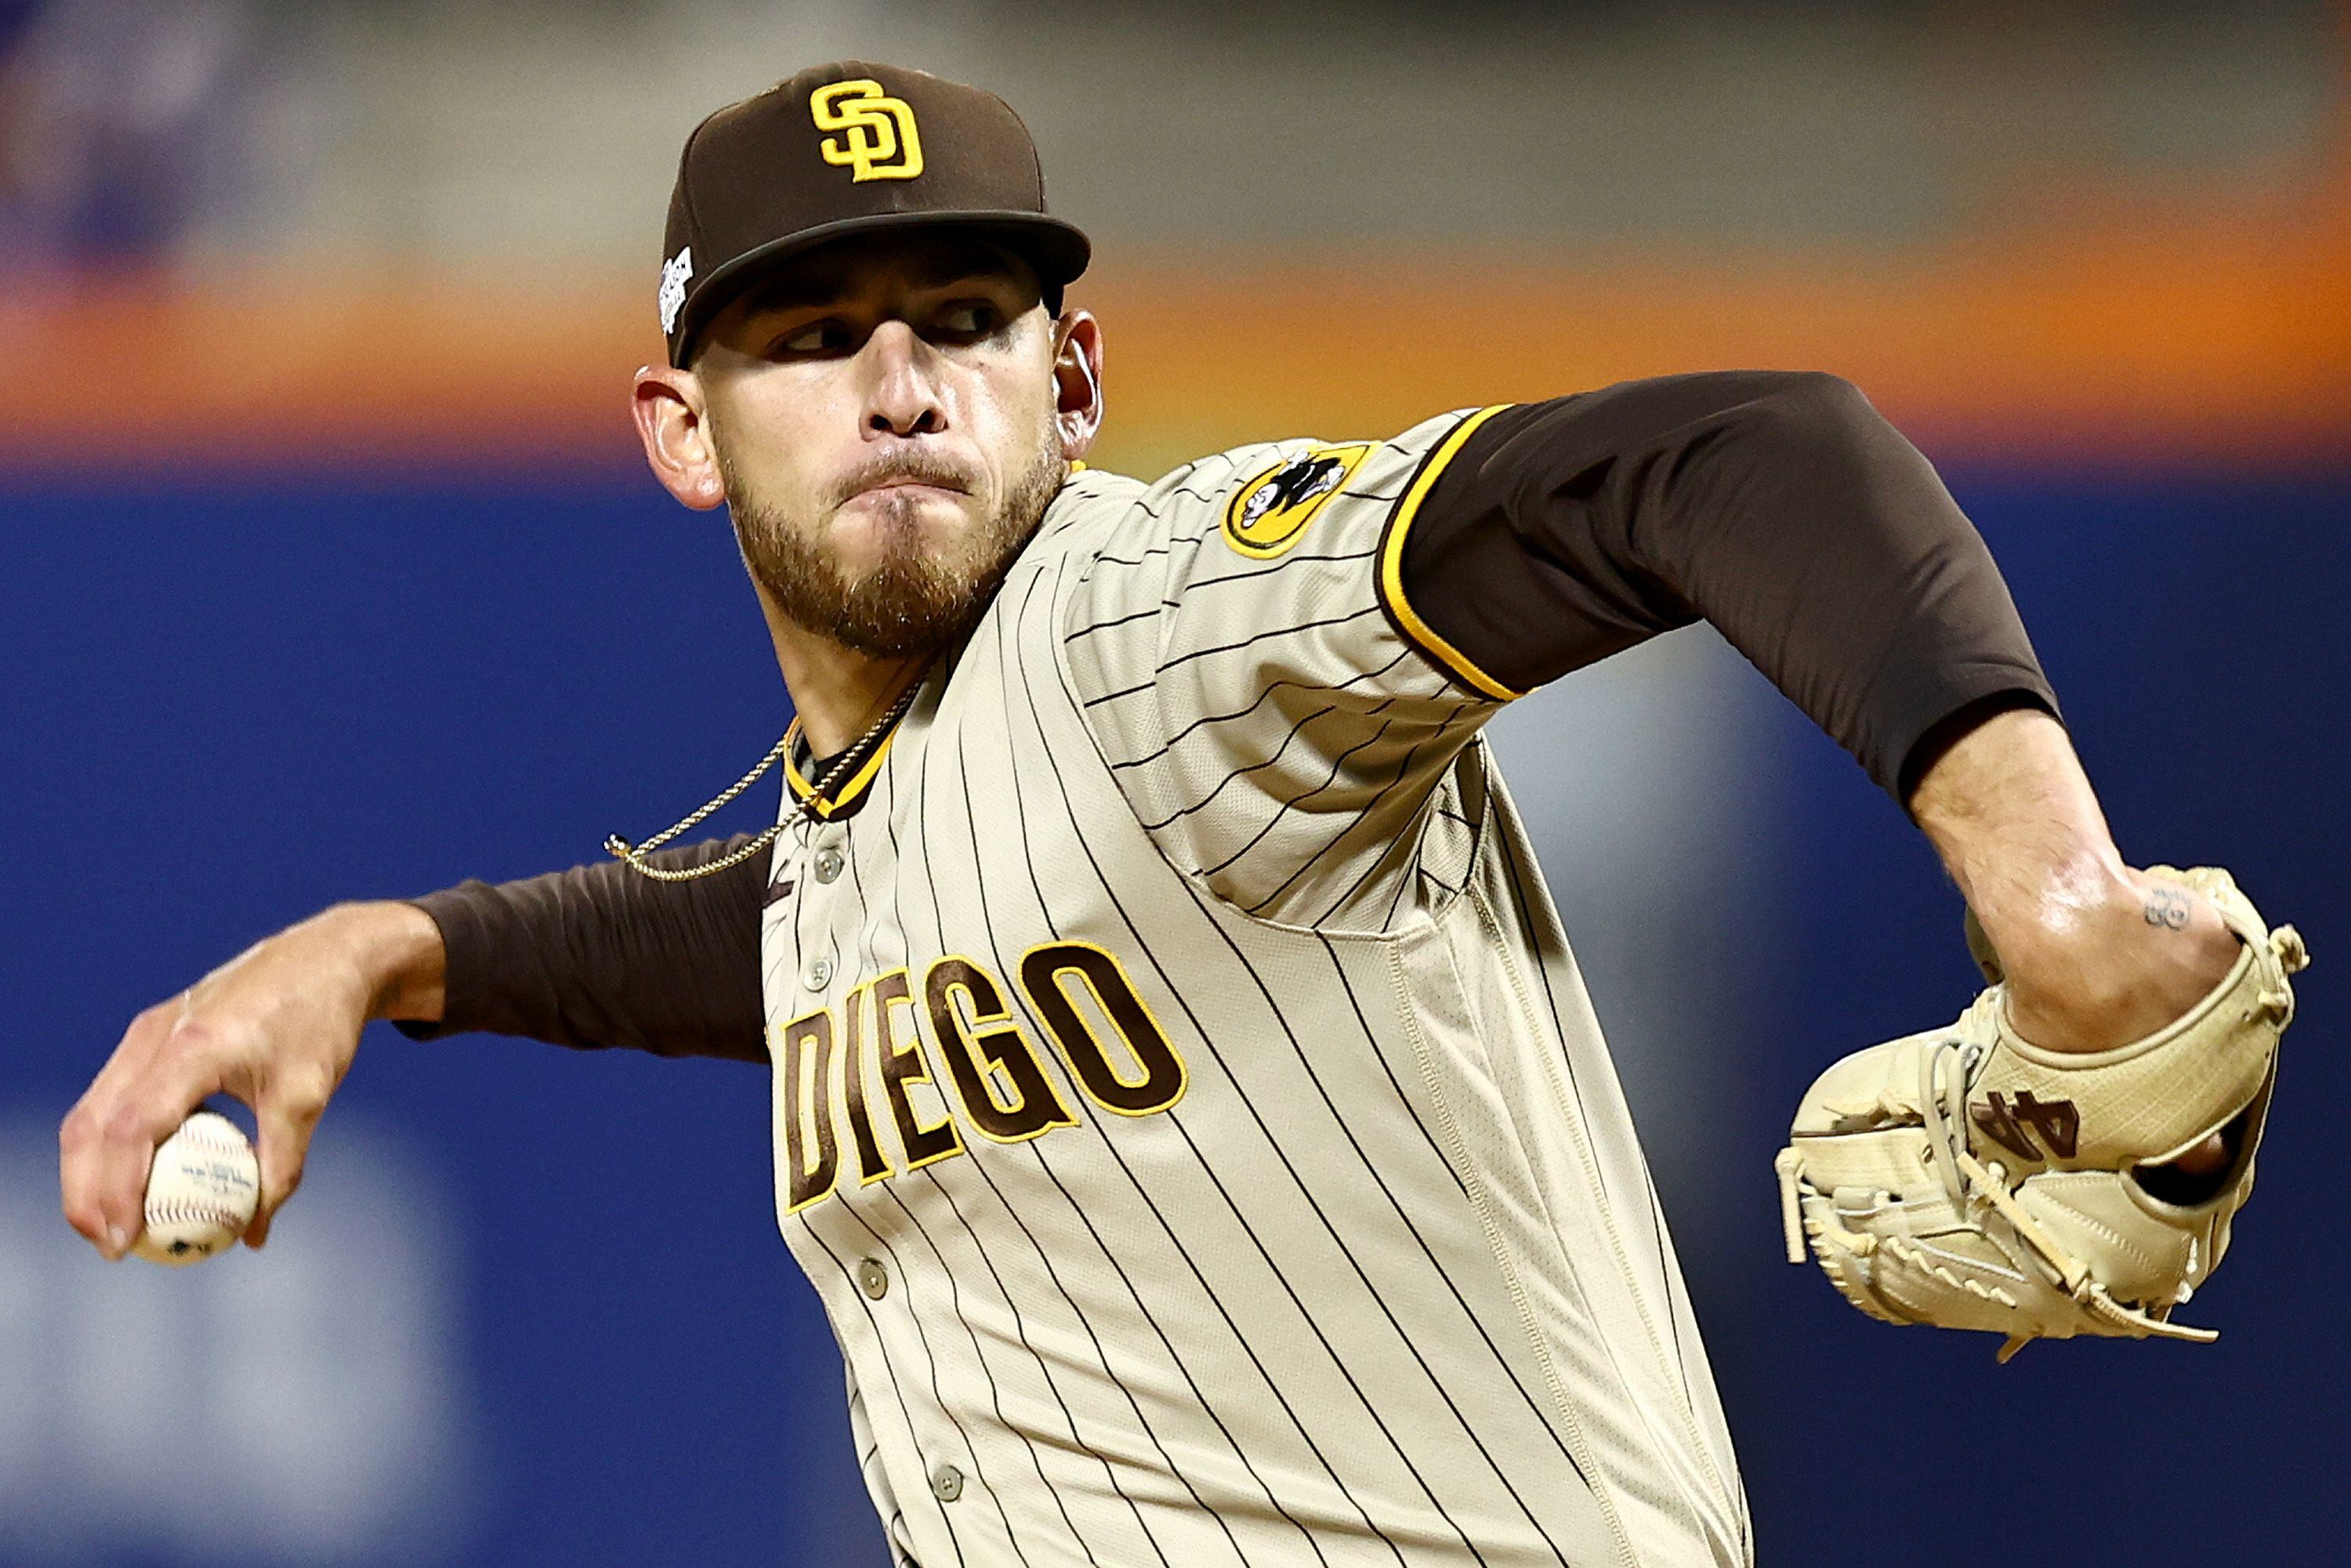 Musgrove pitches hometown Padres past Mets 6-0 and into NLDS